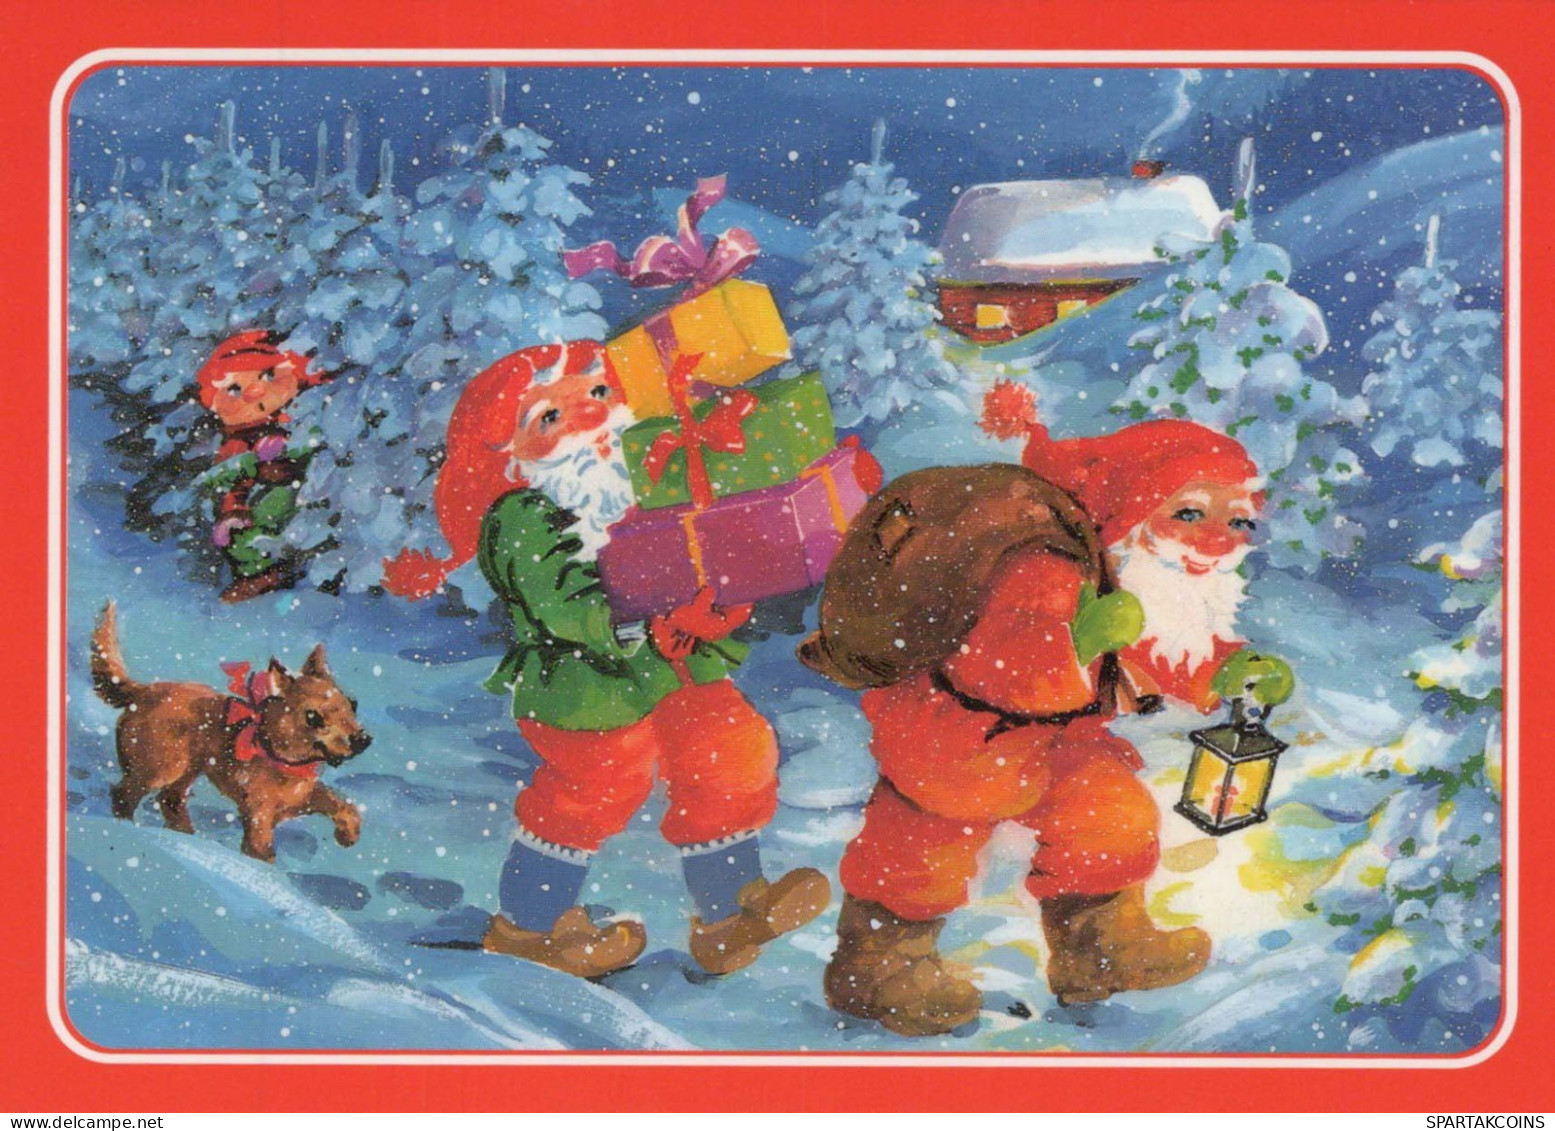 SANTA CLAUS Happy New Year Christmas GNOME Vintage Postcard CPSM #PAY629.A - Kerstman